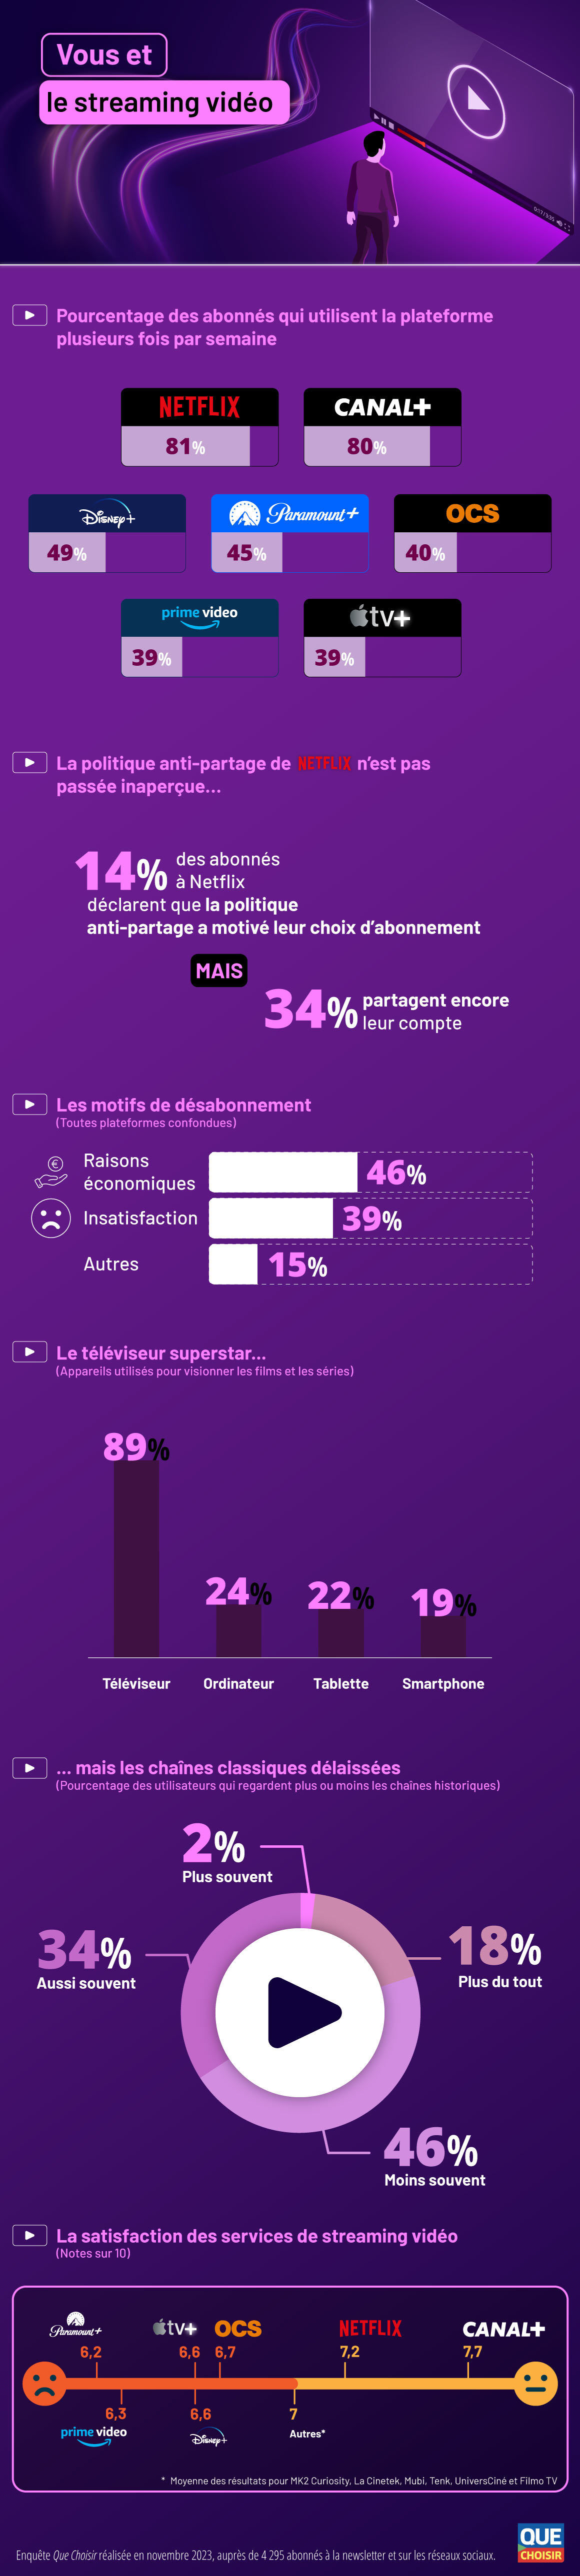 infographie_streaming_video_finale